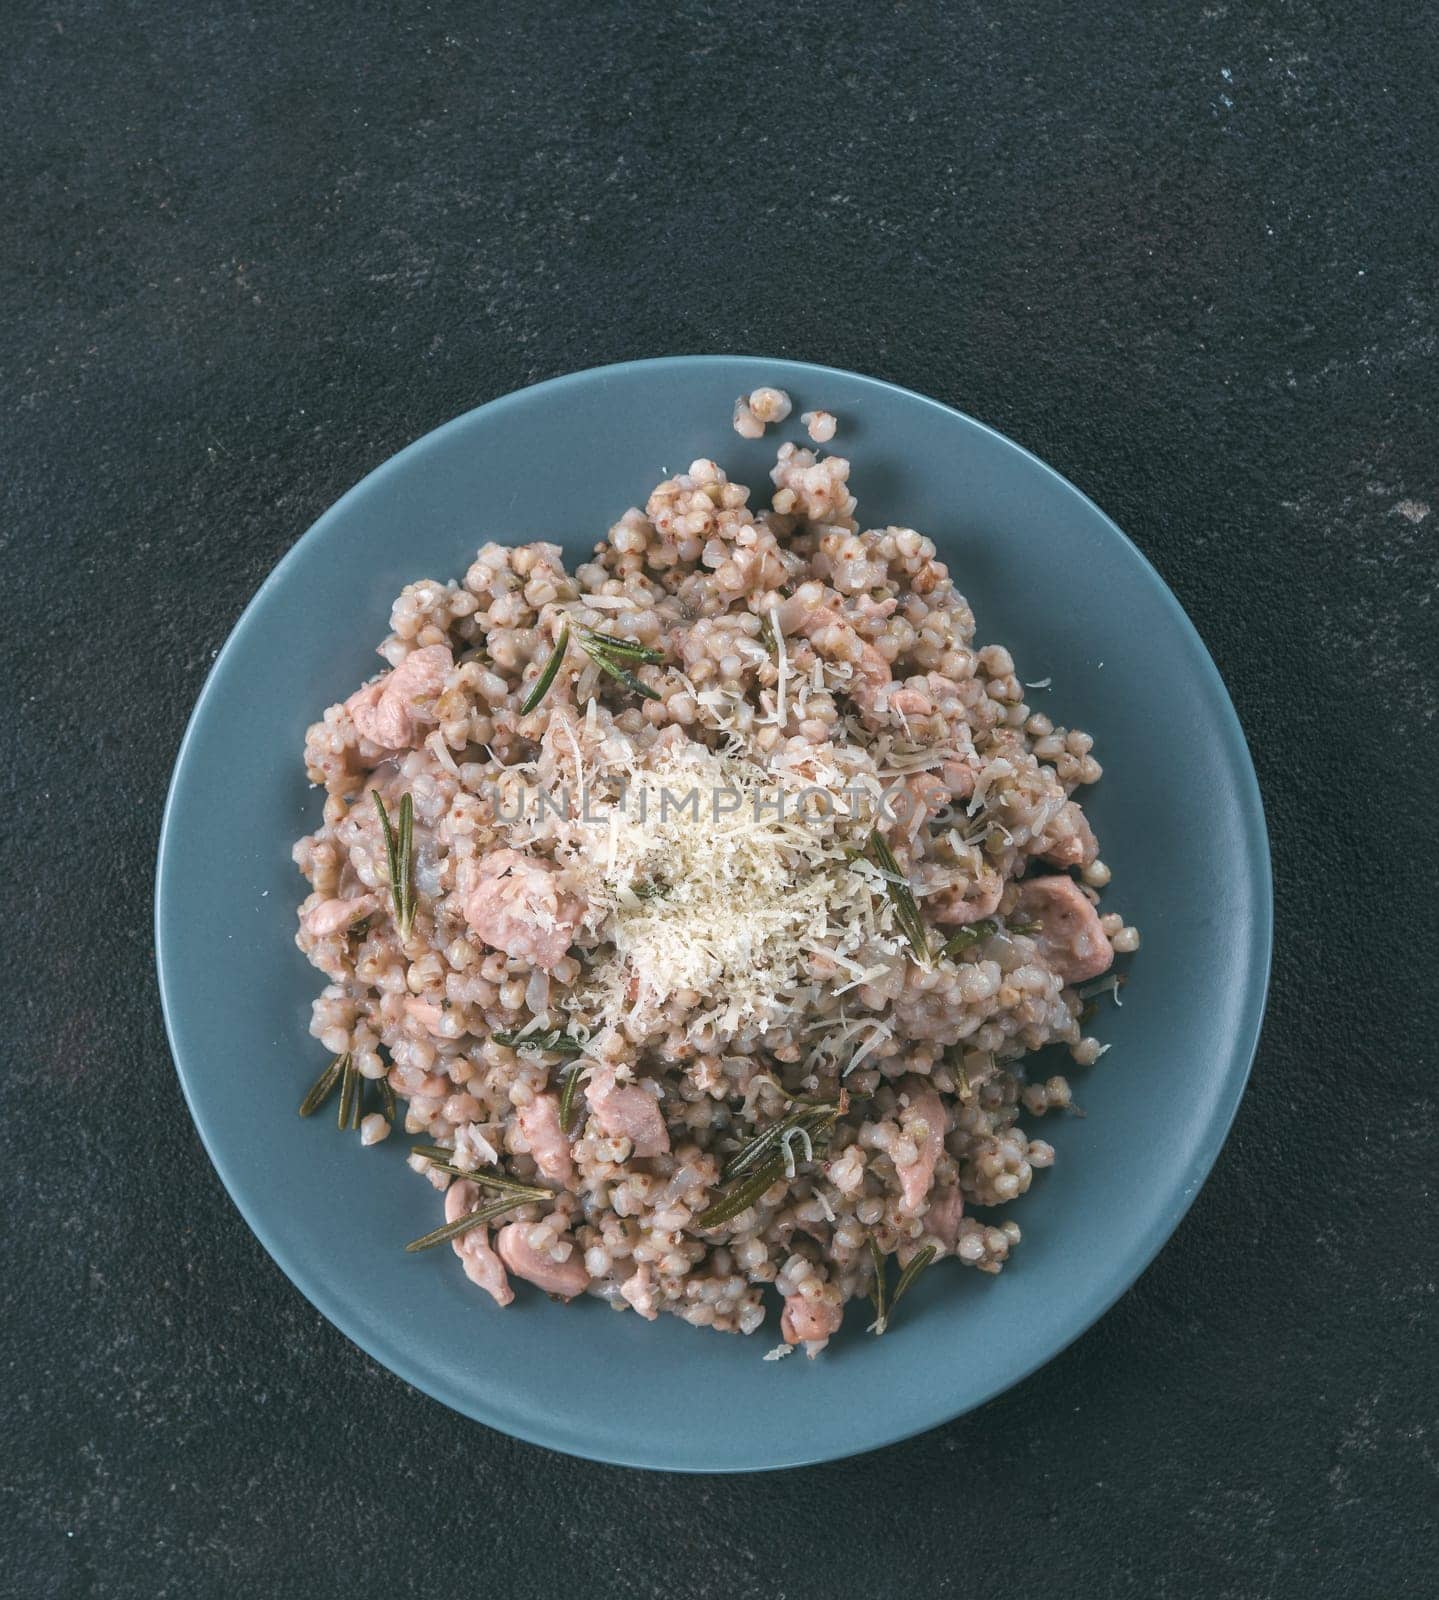 Raw buckwheat risotto with chicken meat and rosemary served parmesan cheese in gray plate on black cement background. Gluten-free and buckwheat recipe ideas. Copy space.